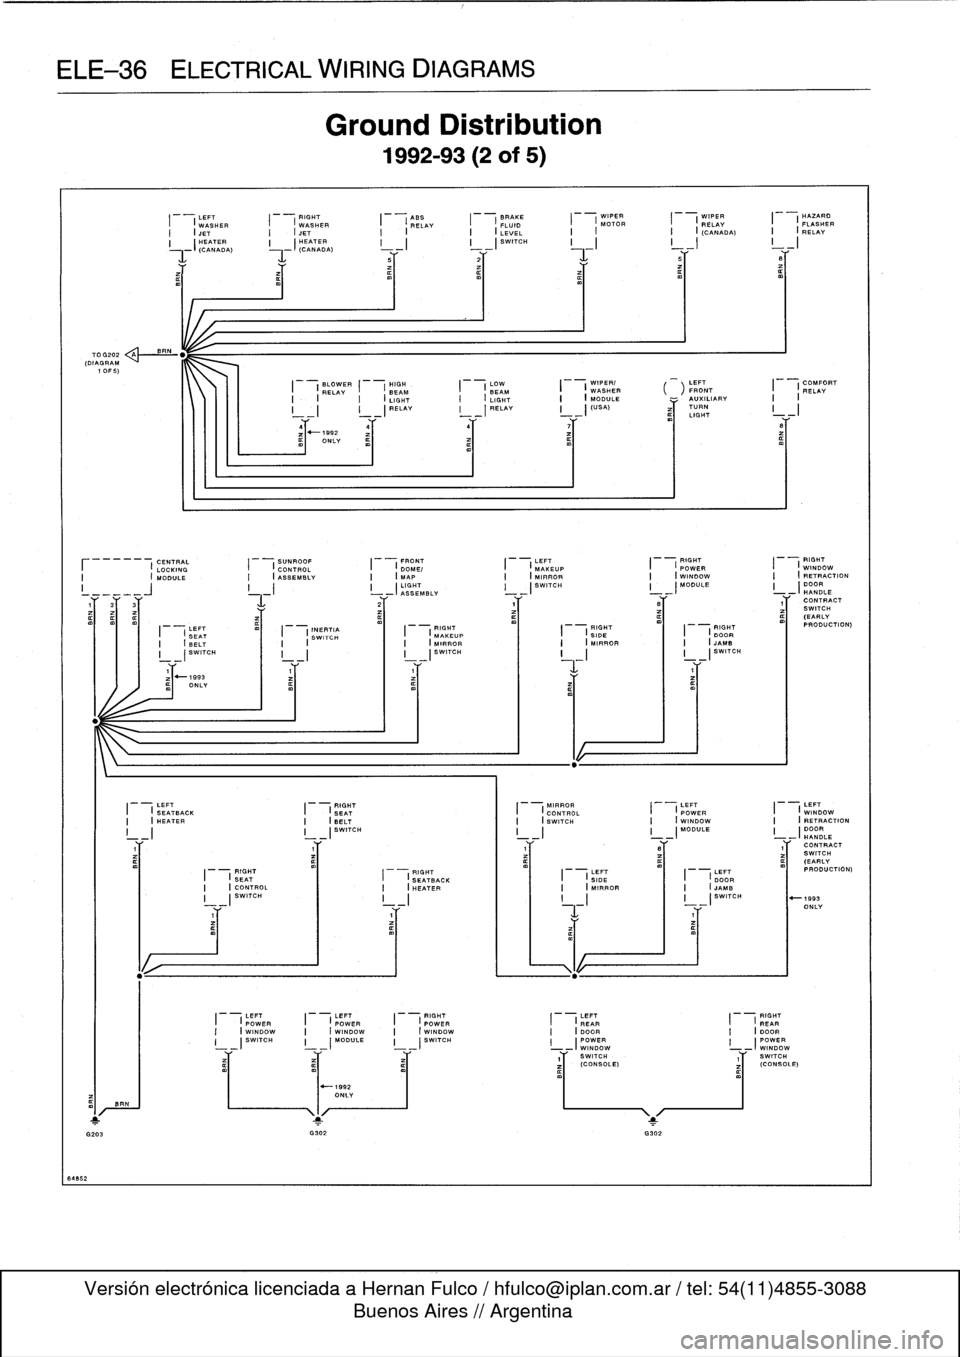 BMW 323i 1995 E36 Owners Guide 
ELE-36
ELECTRICAL
WIRING
DIAGRAMS

64852

70G202
(DIAGRAM
1
OF
5)

BR

BRN

LEFT

	

RIGHT

	

ASS

	

BRAKE

	

WIPER

	

WIPER

	

HAZARD
I

	

(
WASHER

	

I

	

(
WASHER

	

I

	

(
RELAY

	

I

